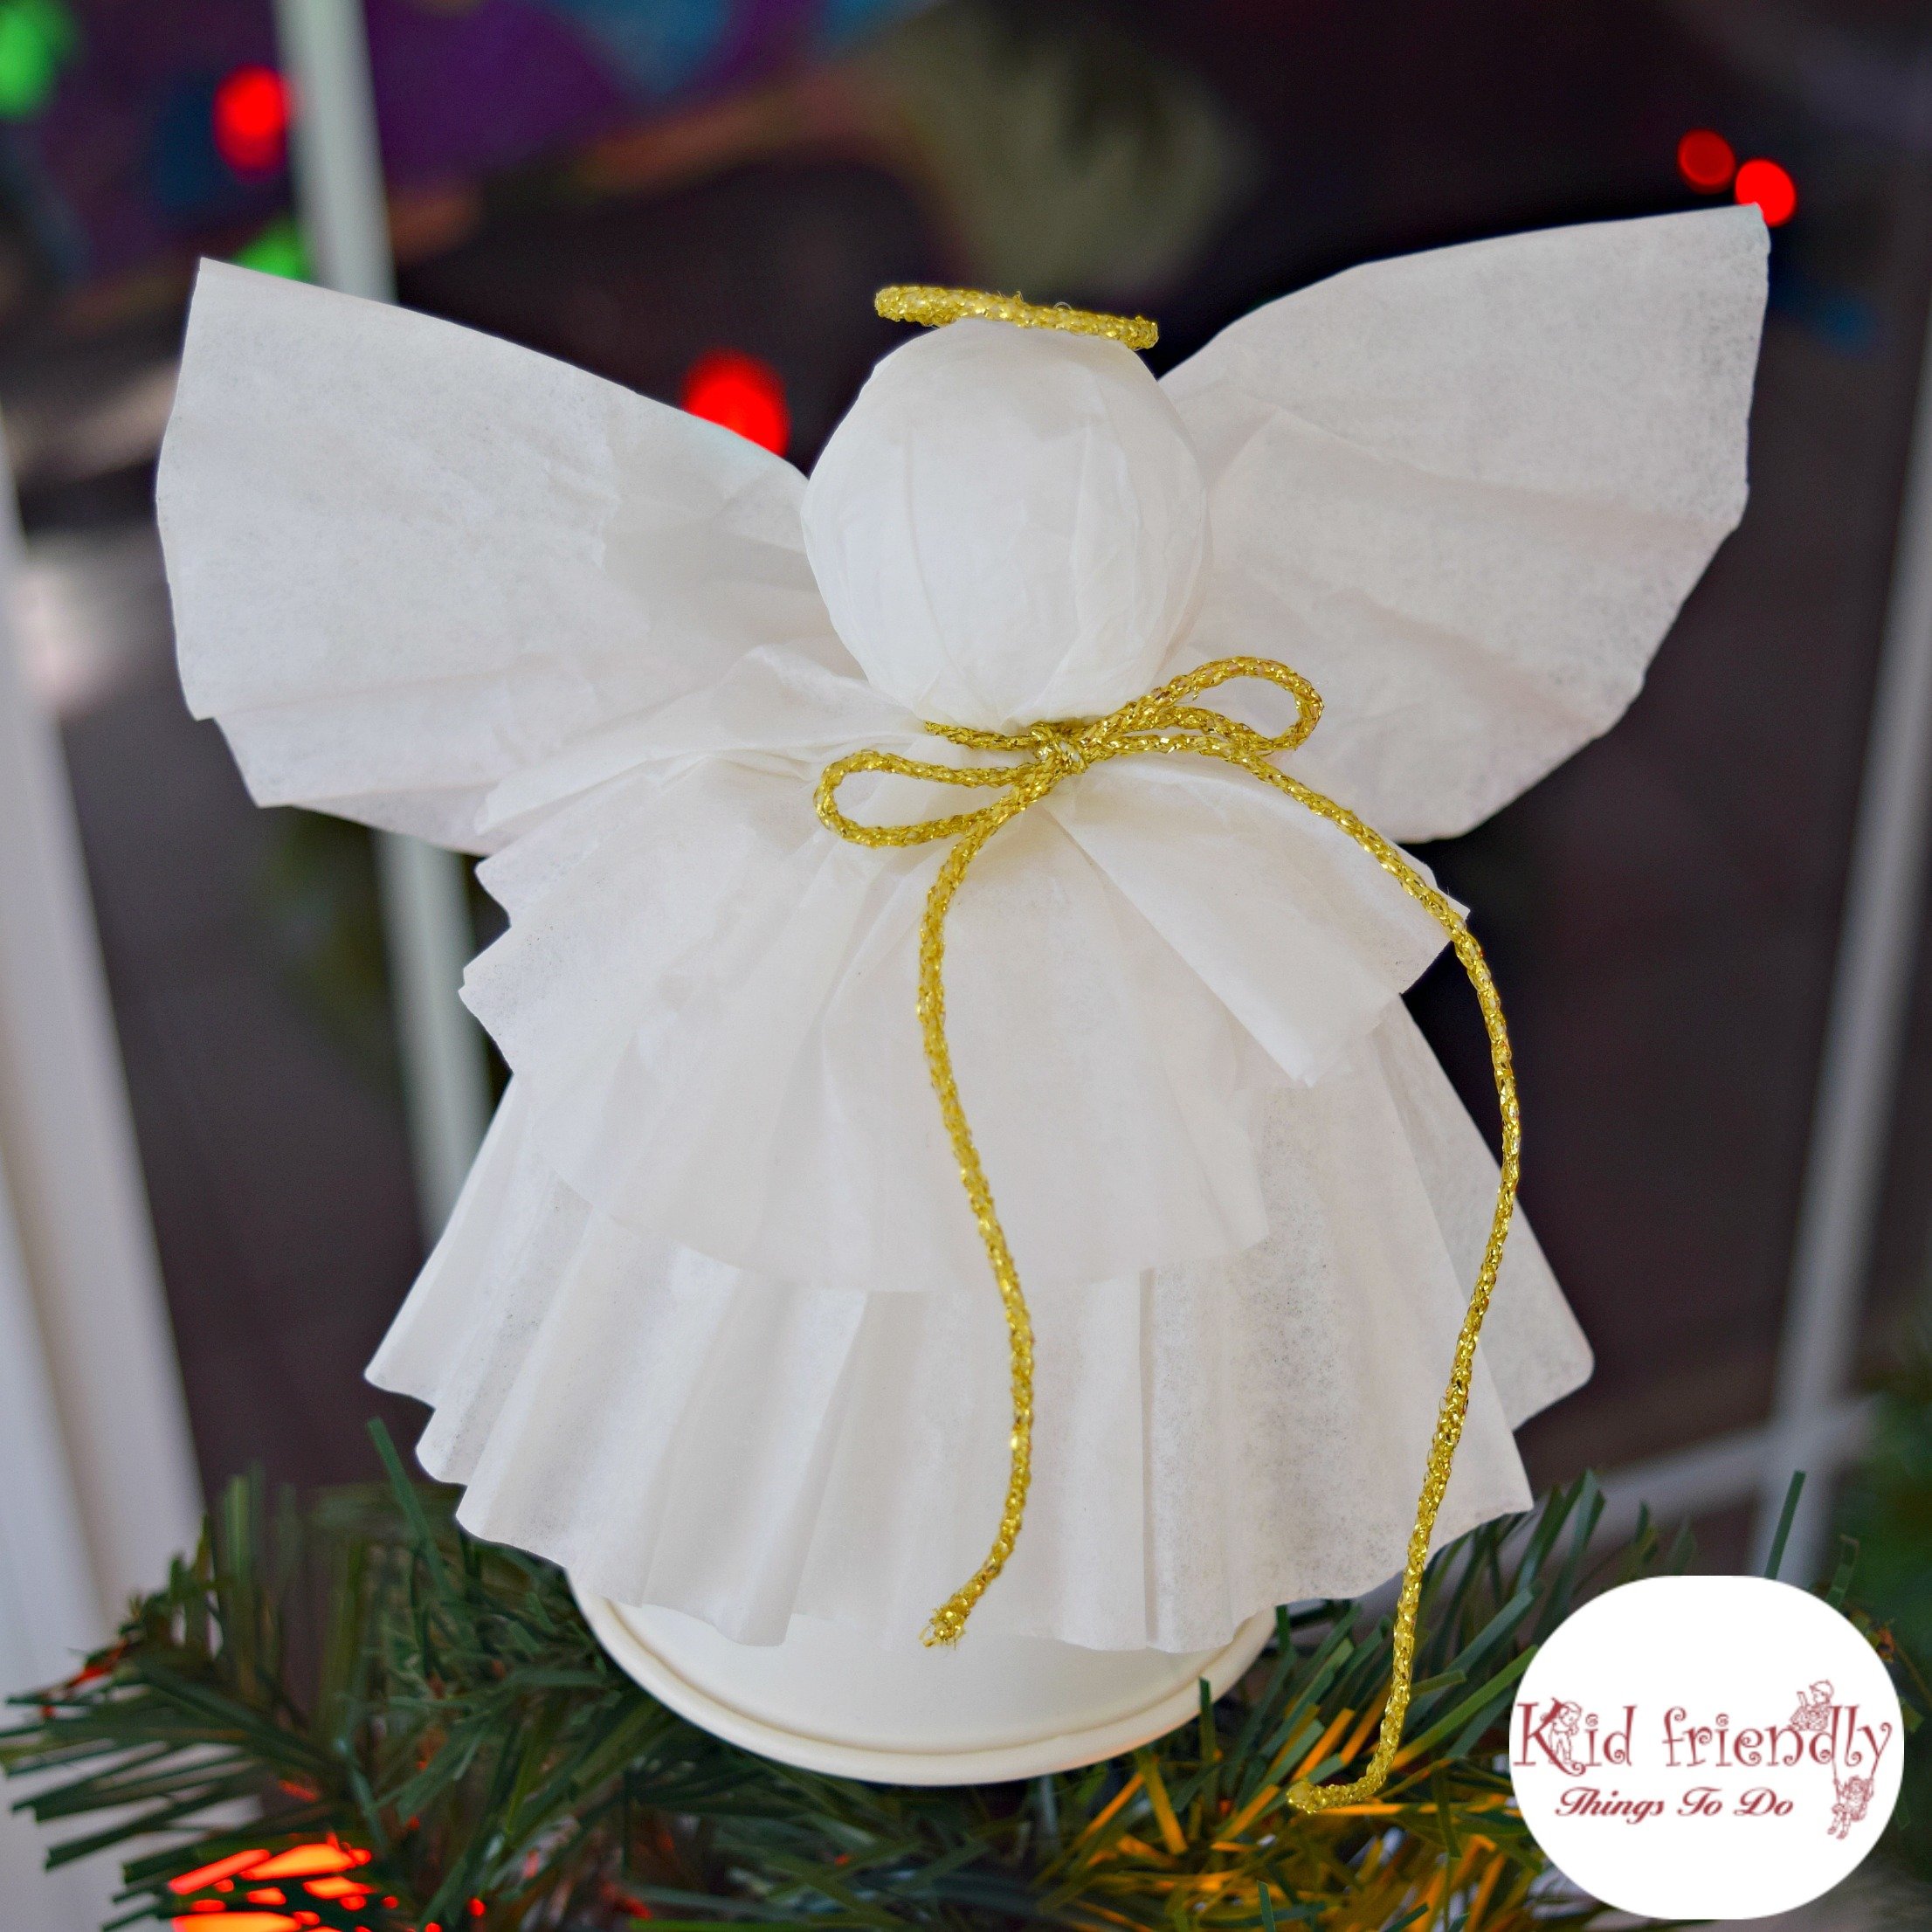 A Simple Coffee Filter Angel Christmas Tree Topper Craft for Kids to Make